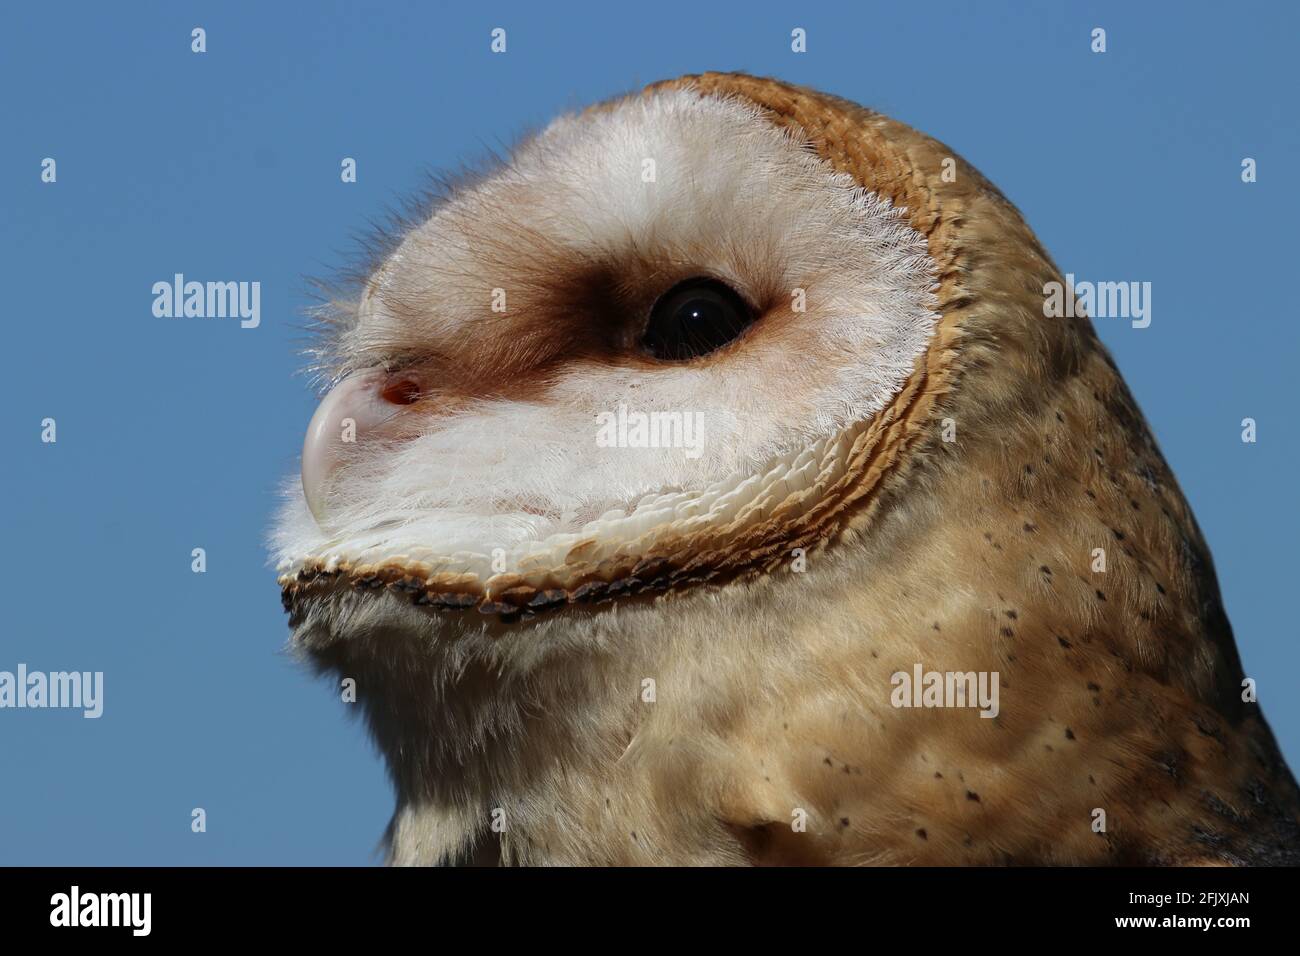 Barn owl head close-up looking up against bright blue sky Stock Photo